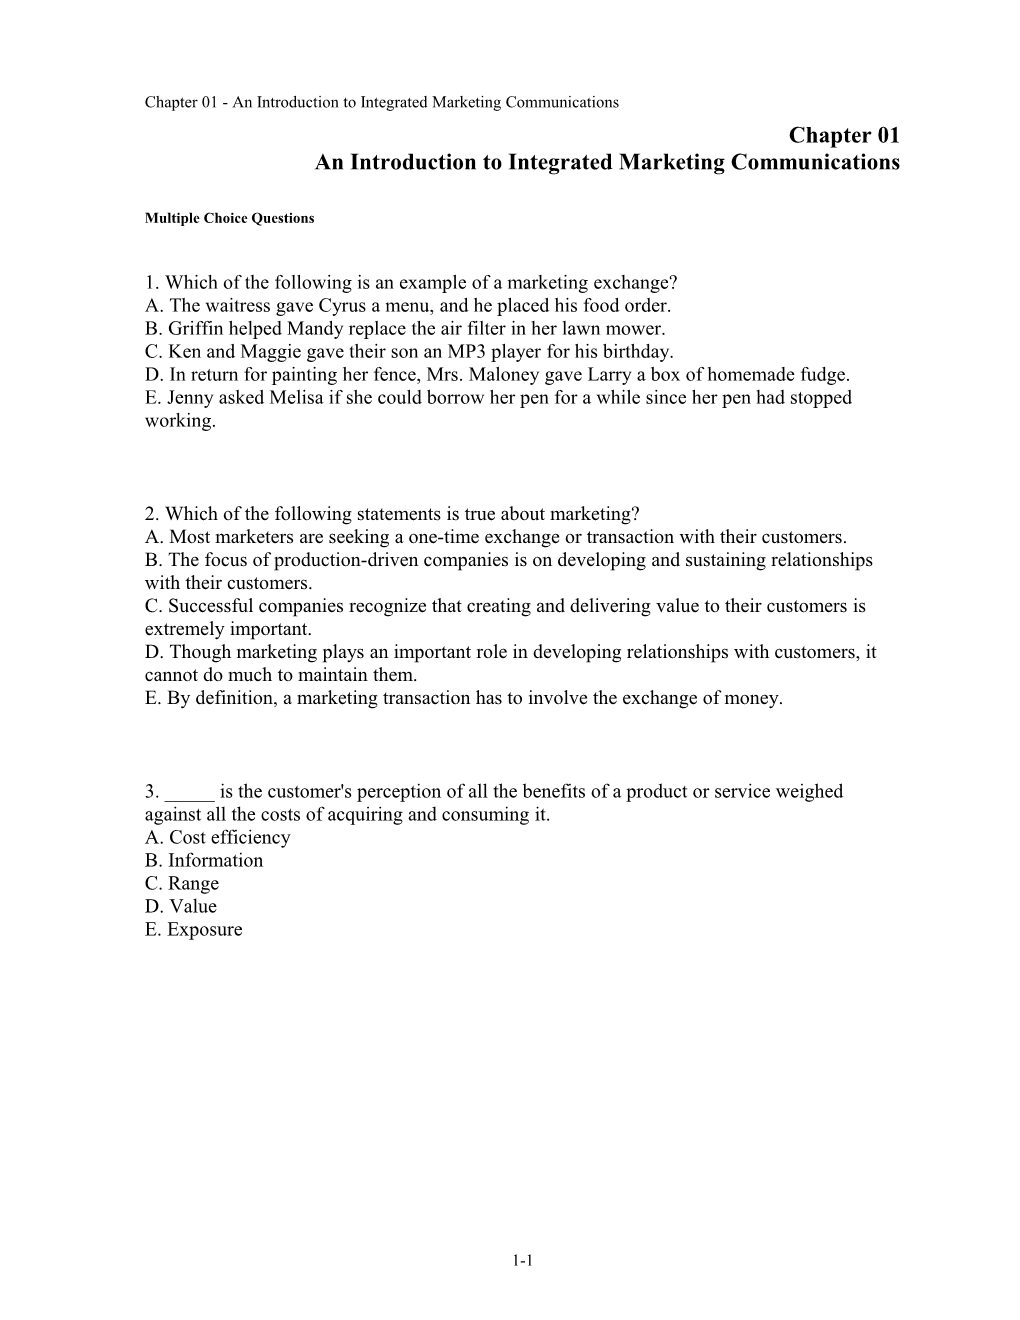 Chapter 01 an Introduction to Integrated Marketing Communications